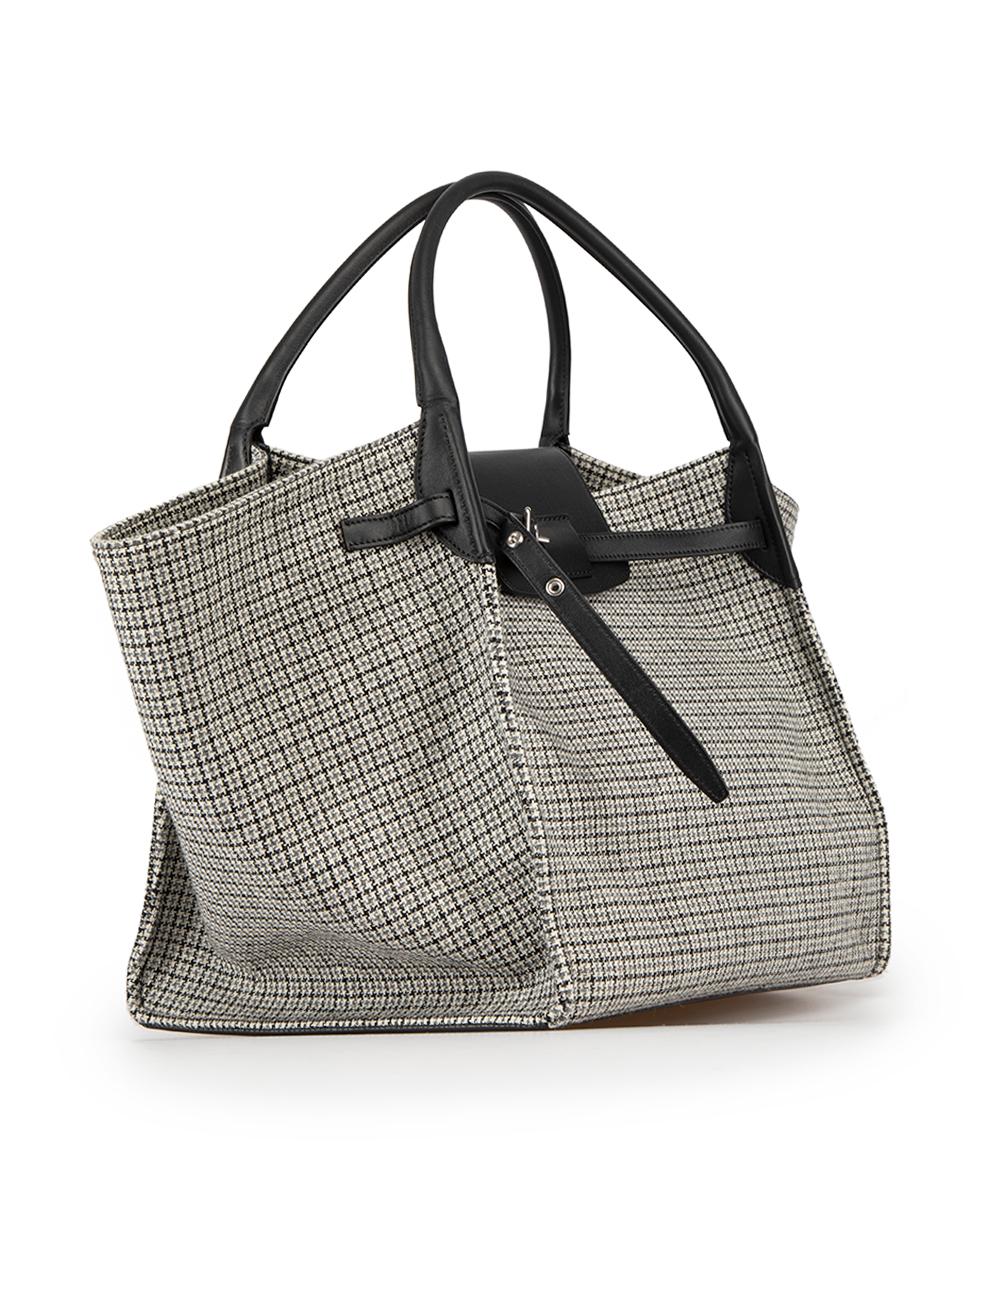 CONDITION is Very good. Minimal wear to tote is evident. Minimal scratching to leather fastening and minor creasing to outer base of bag on this used C√©line¬†designer resale item.
 
Details
Big bag
Grey
Wool
Large tote bag
Houndstooth pattern
Black